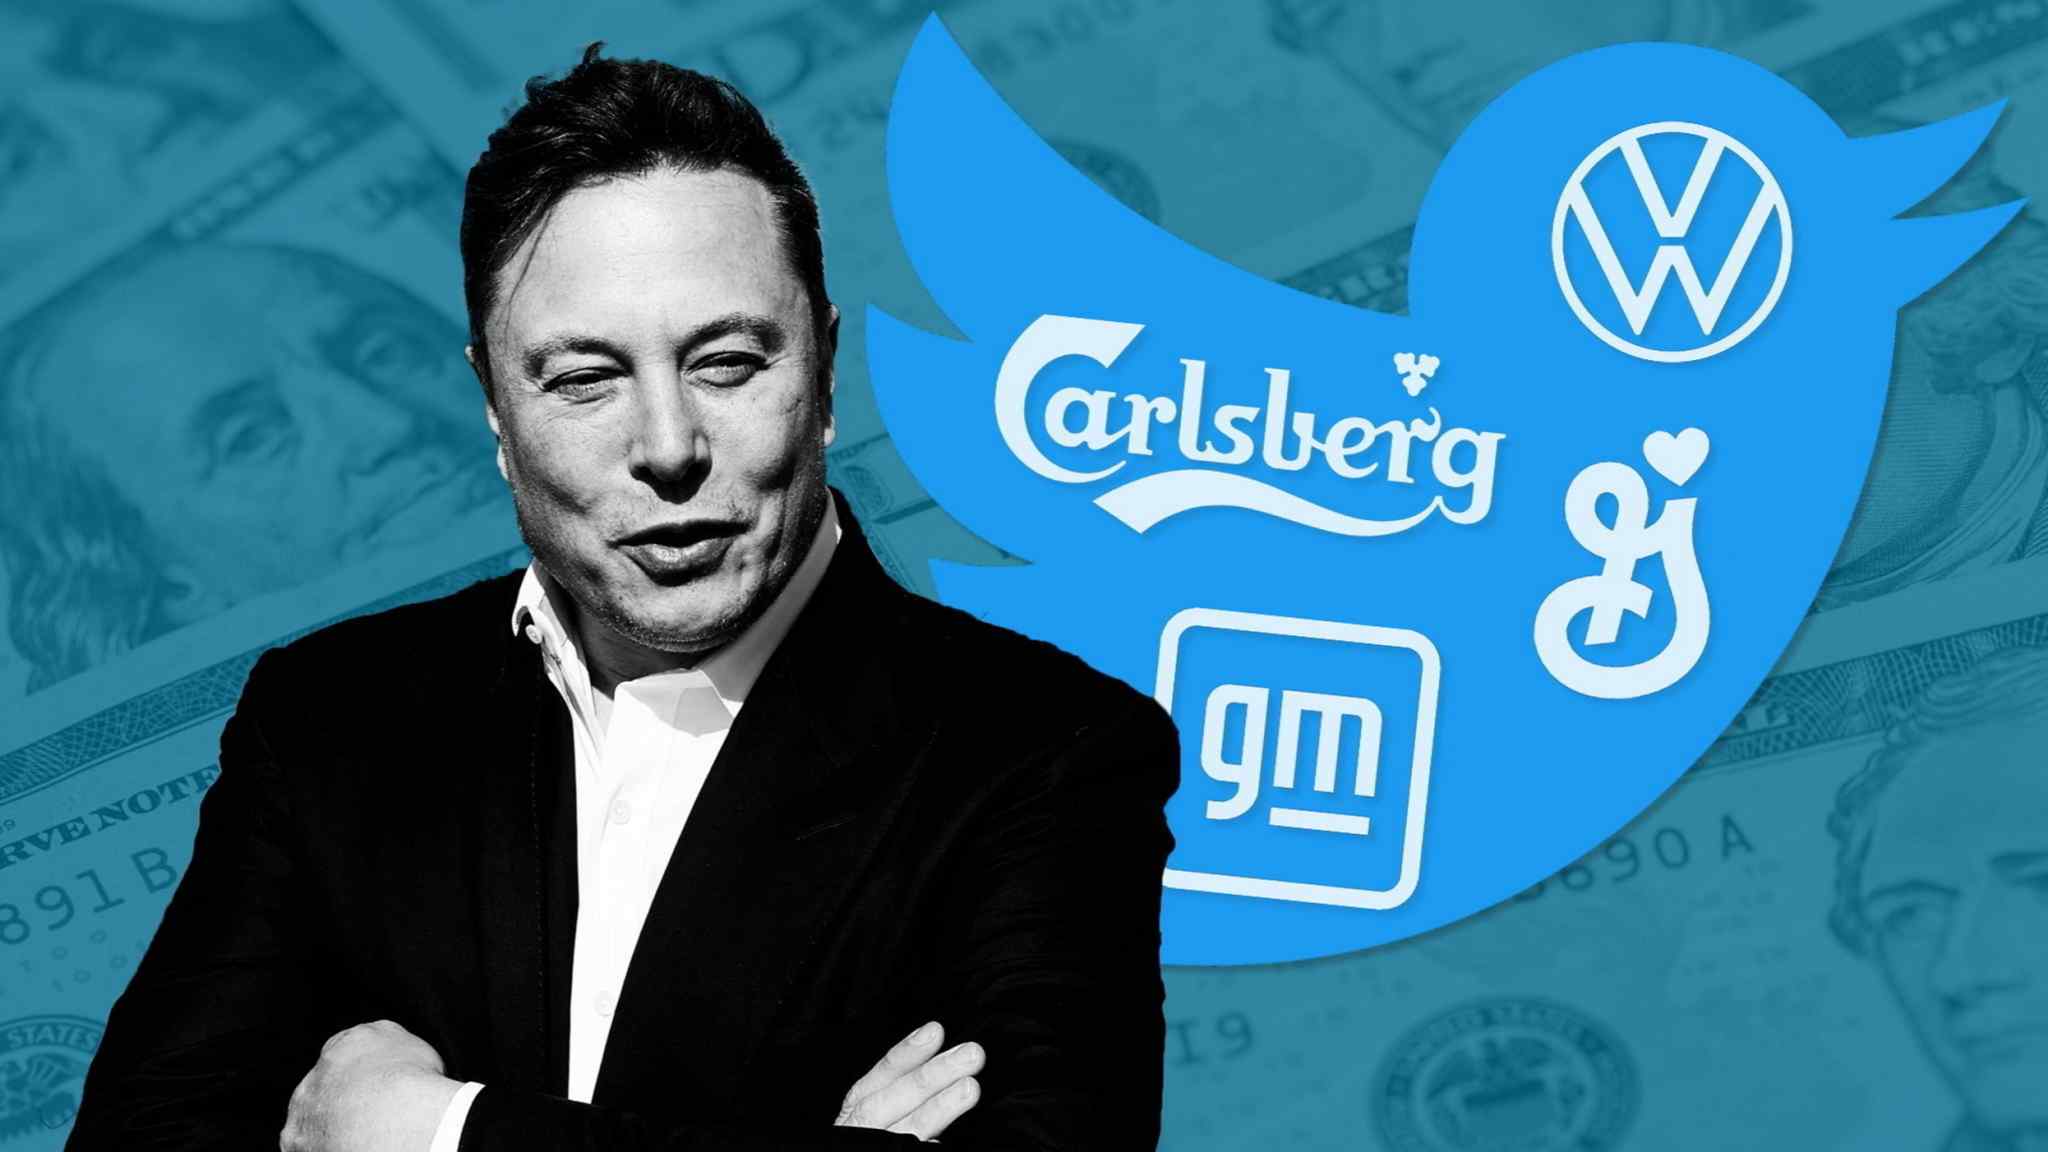 Twitter’s $5bn-a-year business hit as Elon Musk clashes with advertisers 